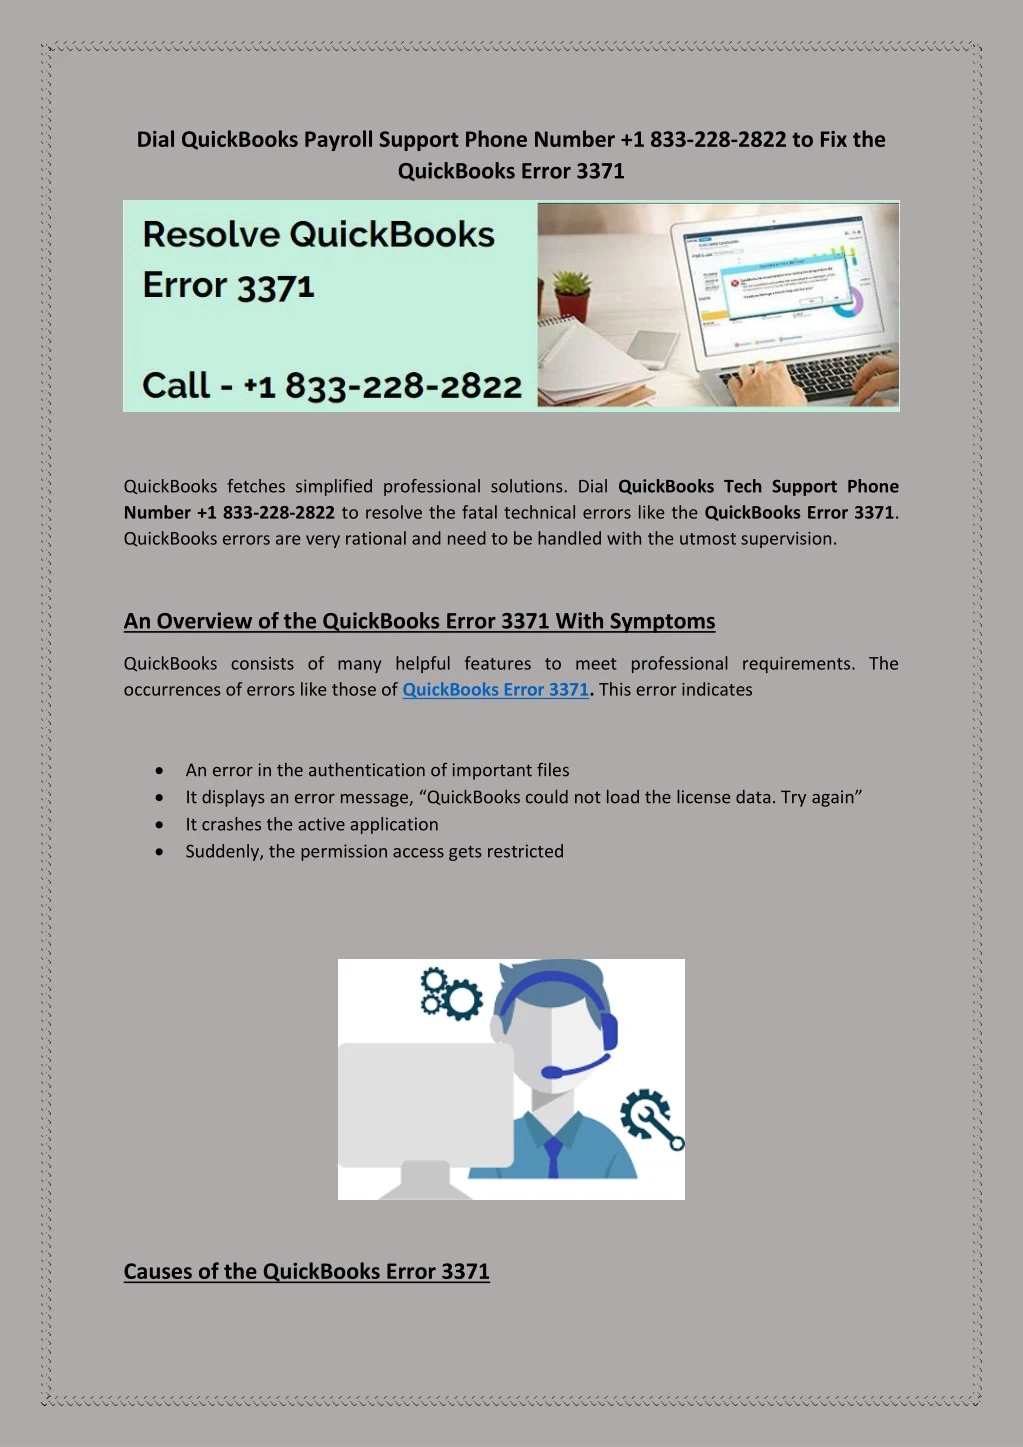 dial quickbooks payroll support phone number